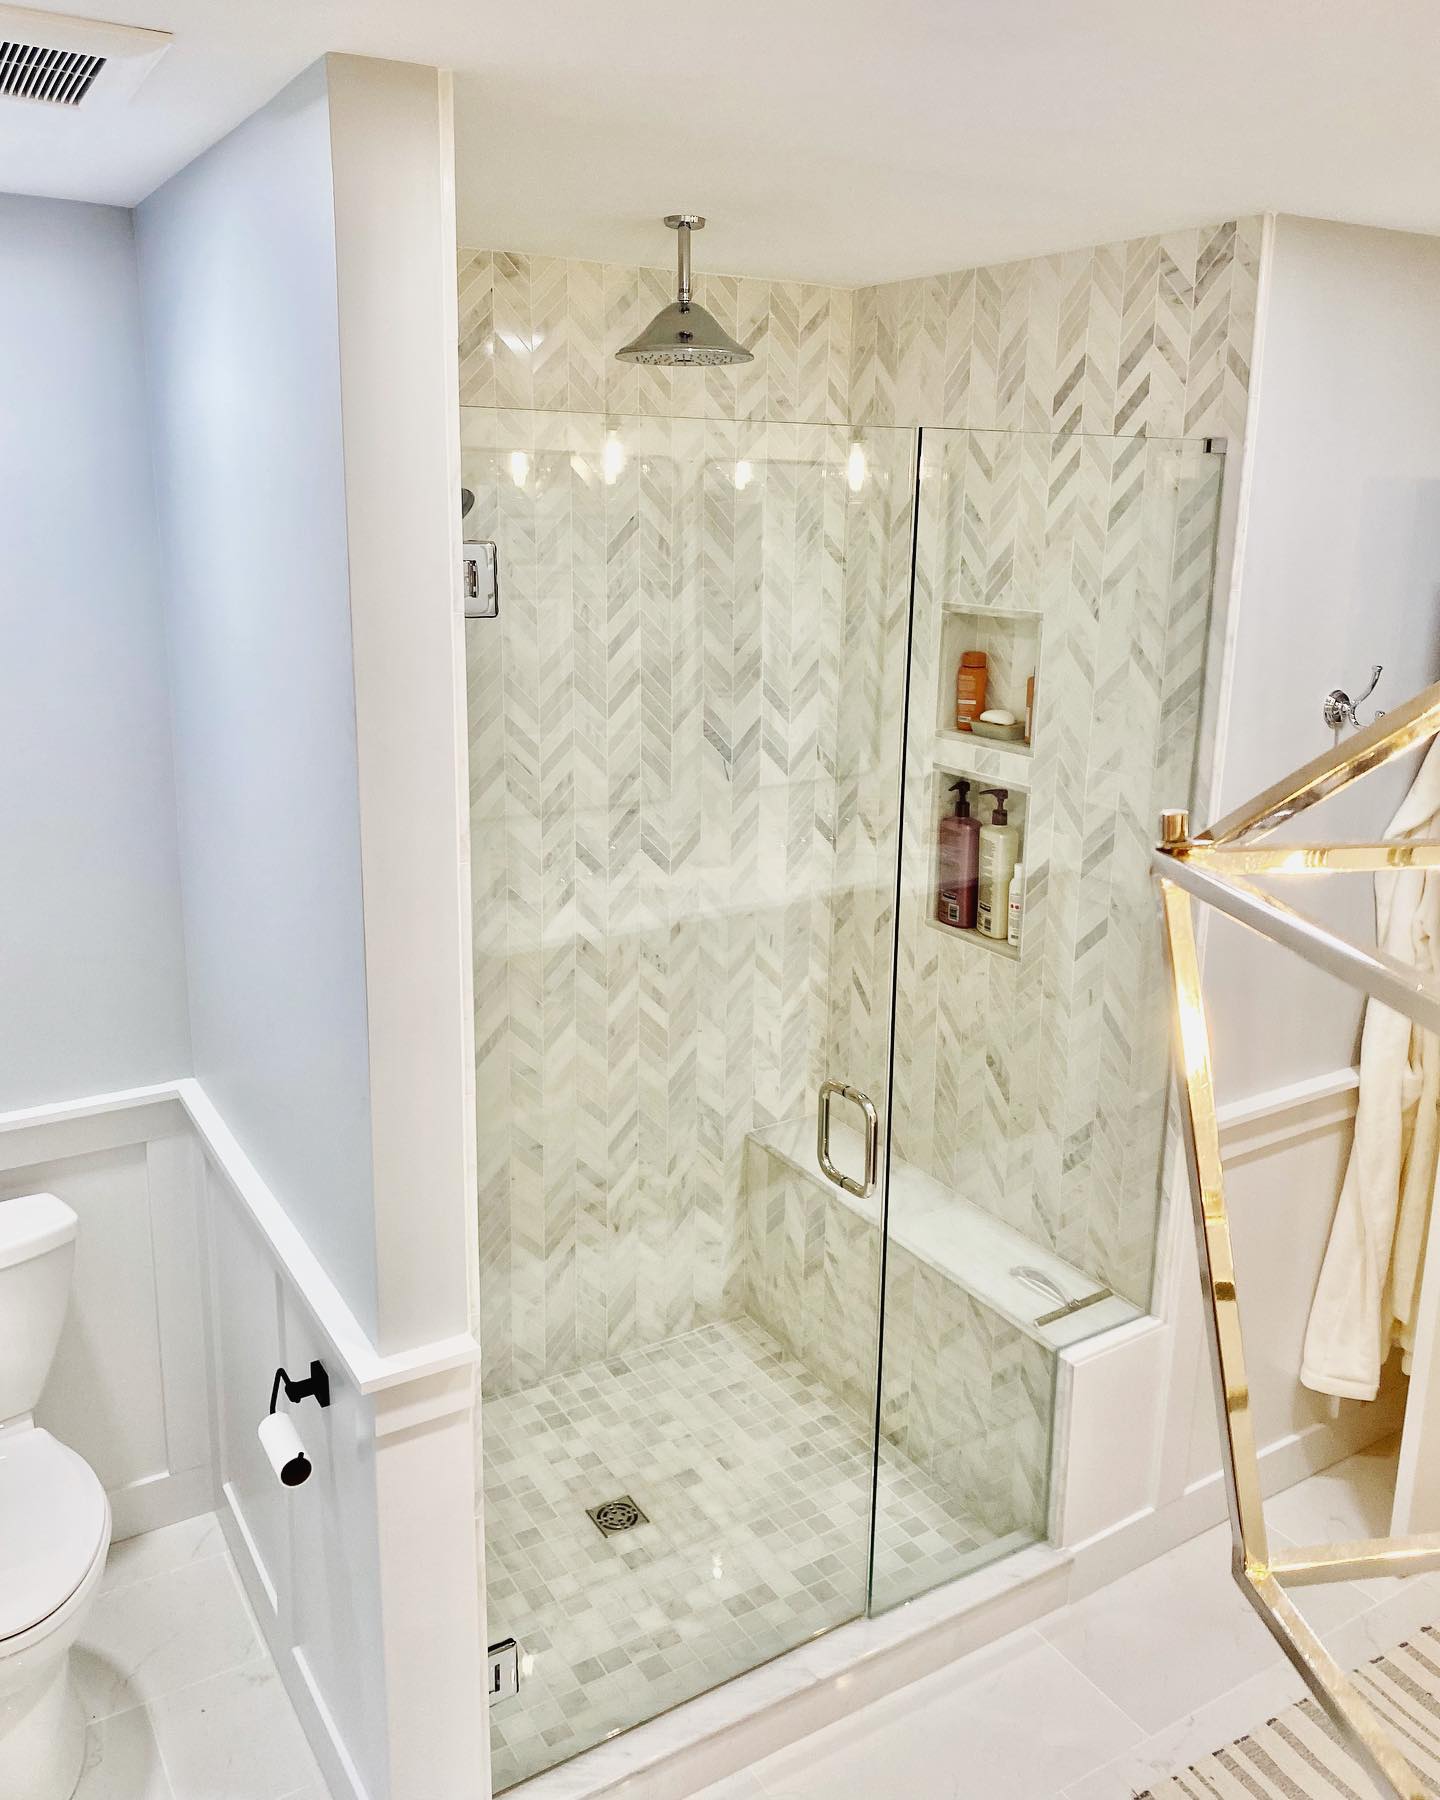 A modern bathroom features a glass-enclosed shower with white herringbone tile walls and a silver showerhead. The room includes a white toilet, a robe on a hook, and a brass towel rack.